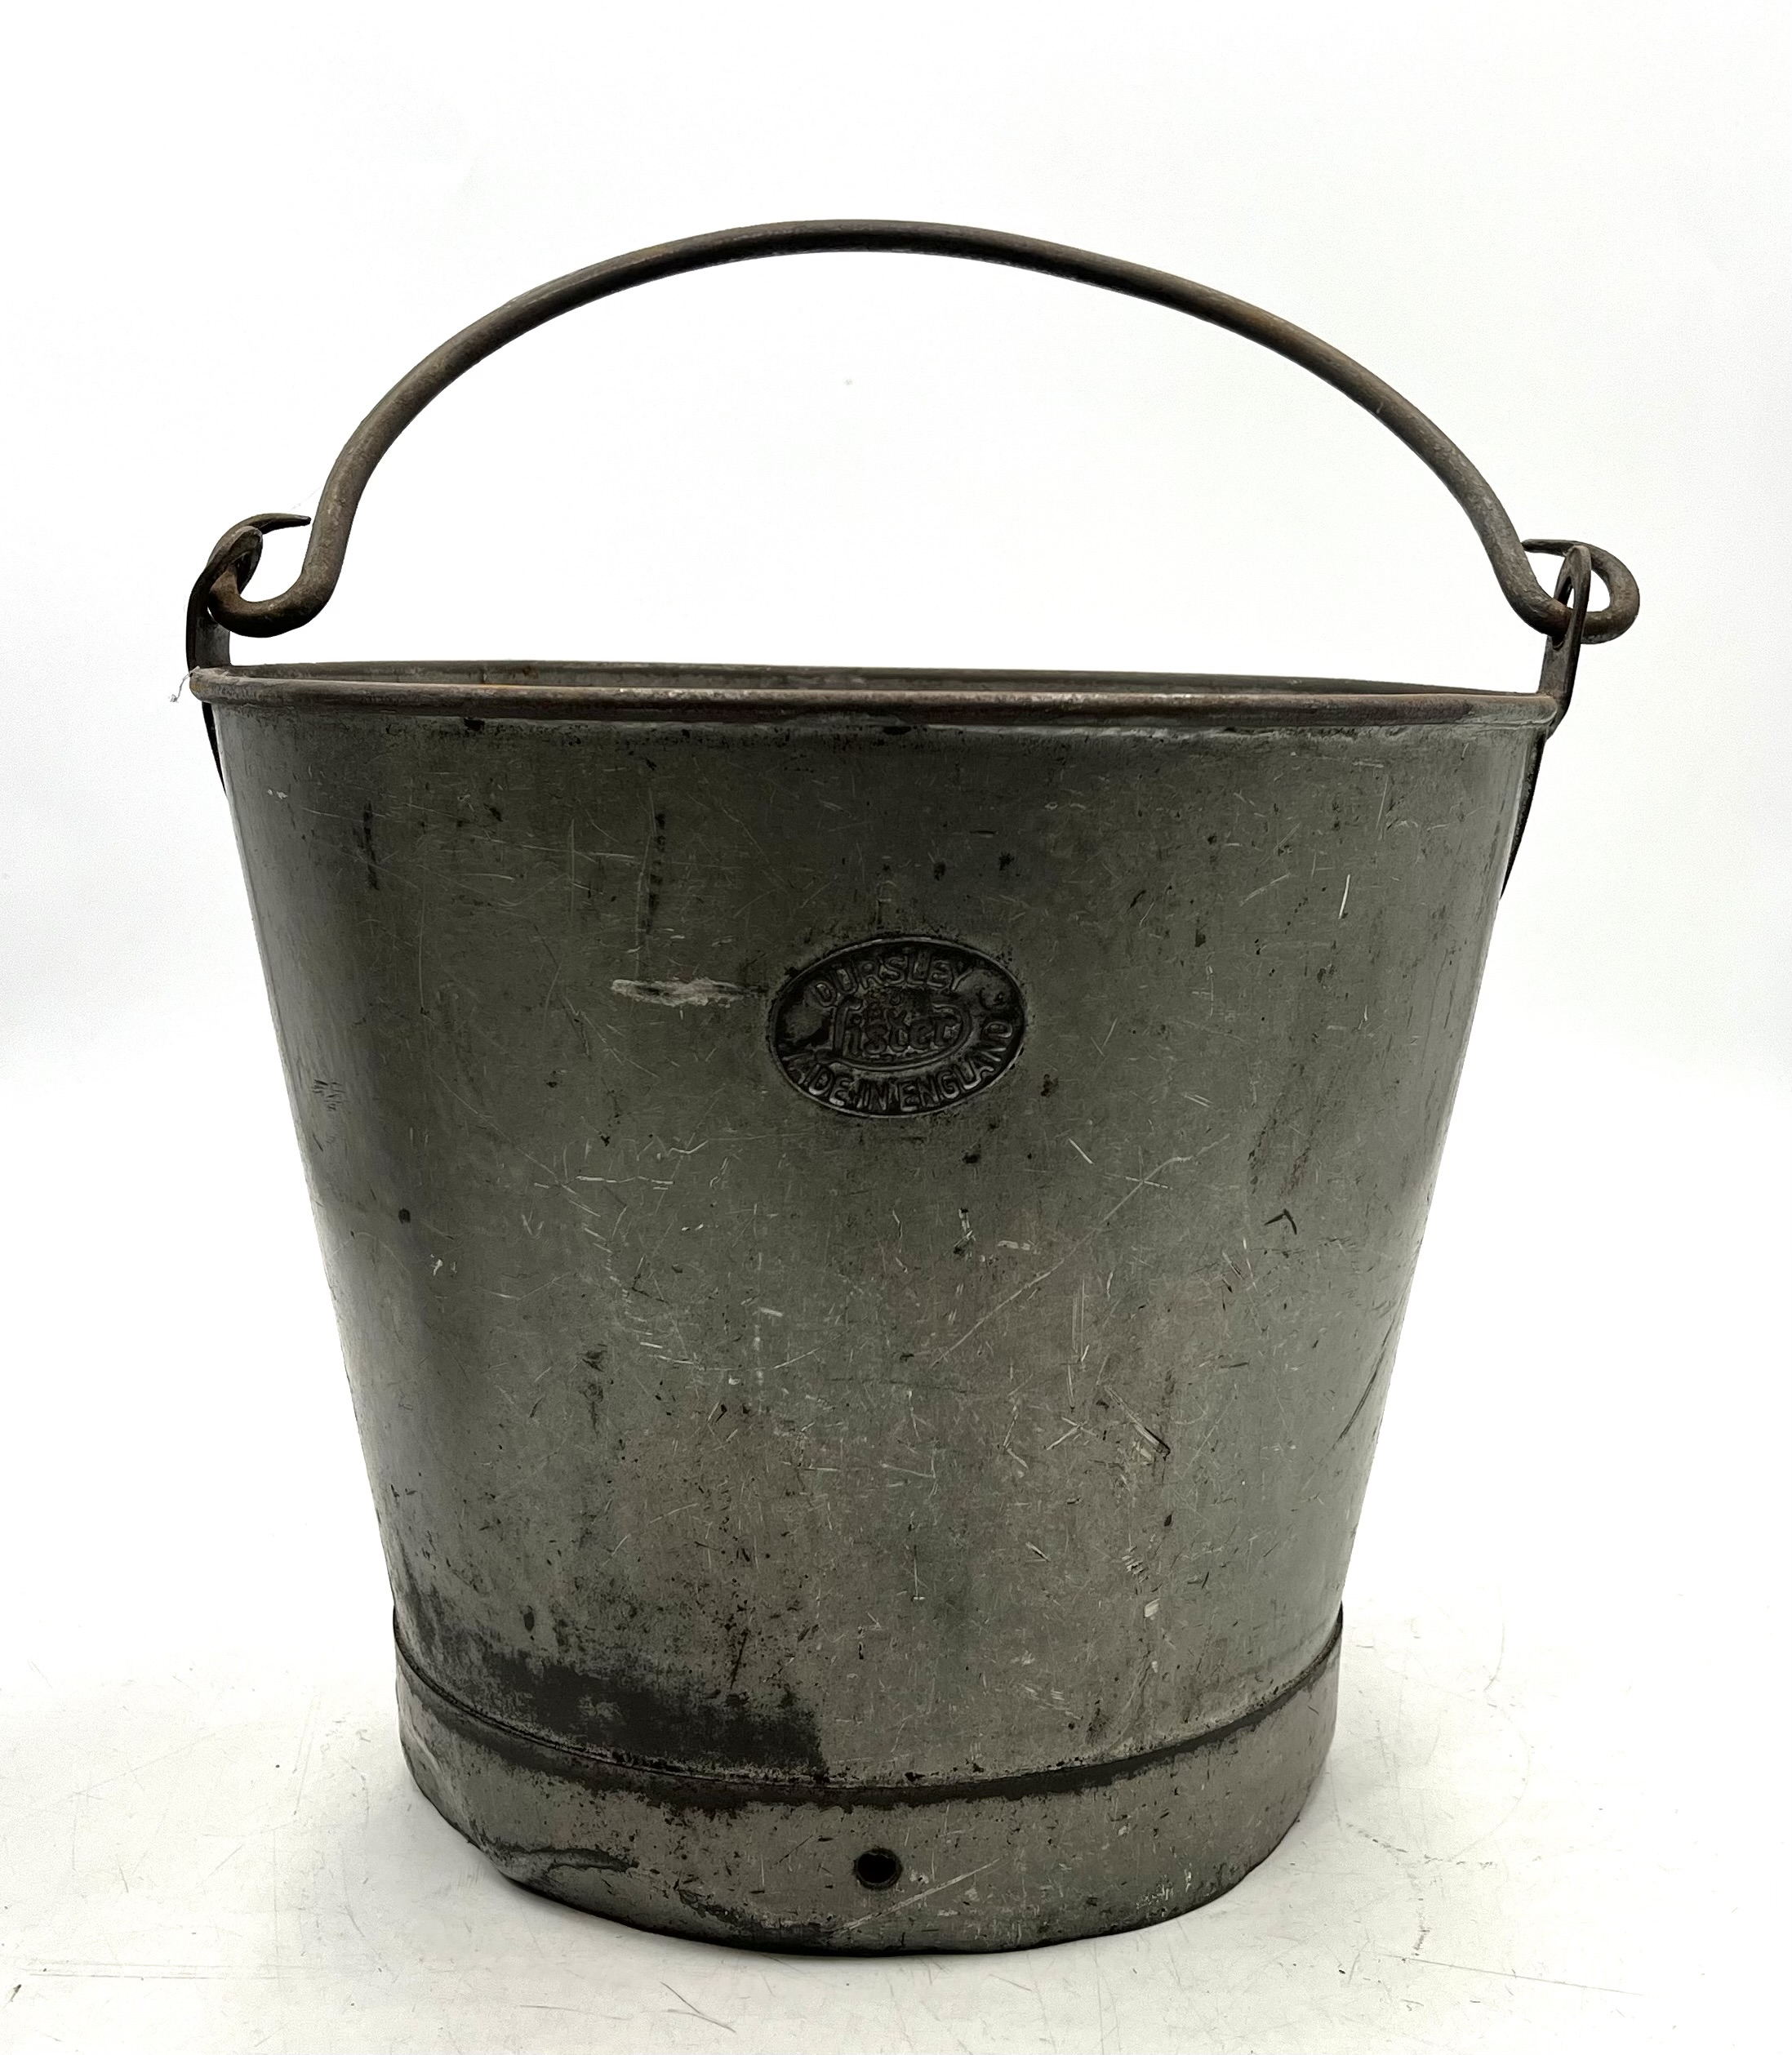 A galvanised Lister bucket along with a Castrol Motor Oil bottle and an Esso lube bottle. - Image 2 of 8